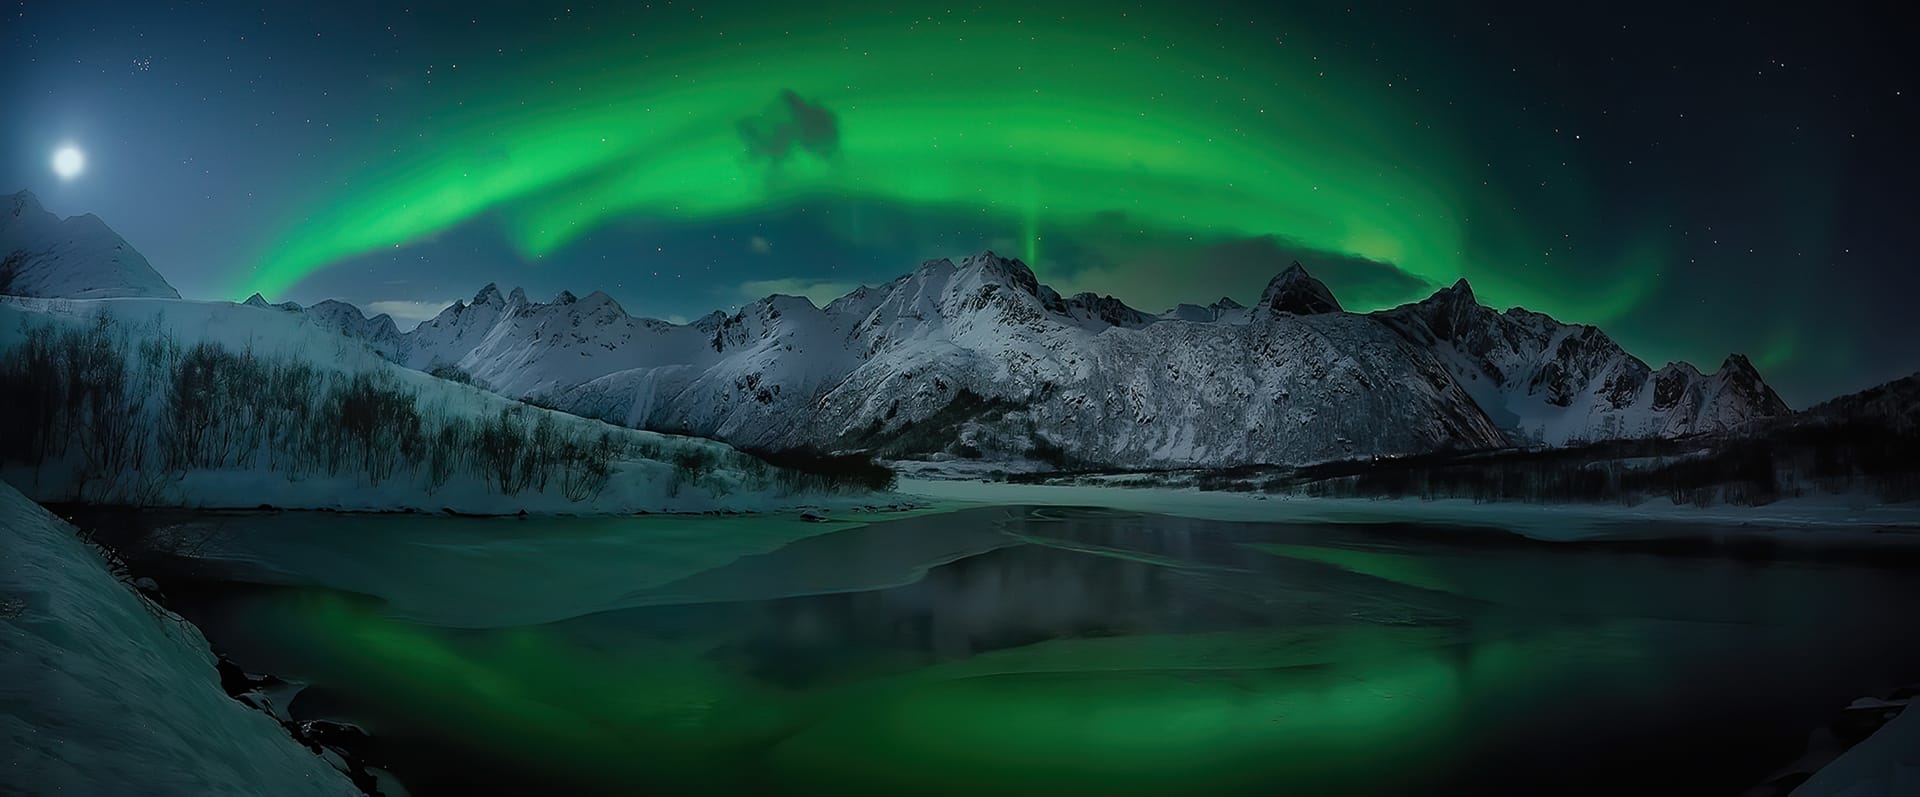 Best Northern Lights panorama images